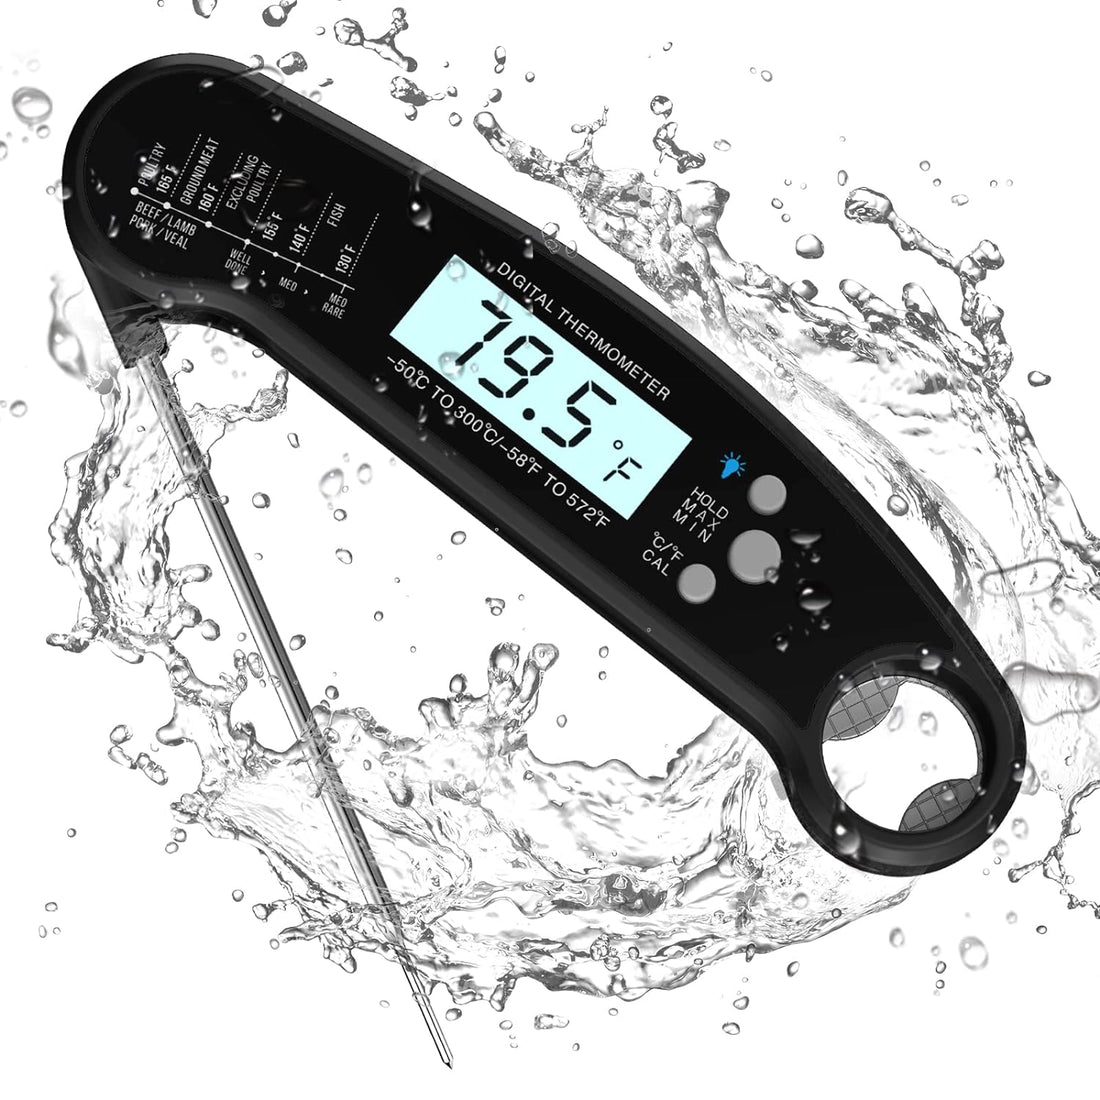 Digital Meat Thermometer with Probe, Instant Read Food Thermometer for Grilling BBQ, Kitchen Cooking, Baking, Liquids, Candy & Air Fryer - IP67 Waterproof, Backlight & Calibration - Black